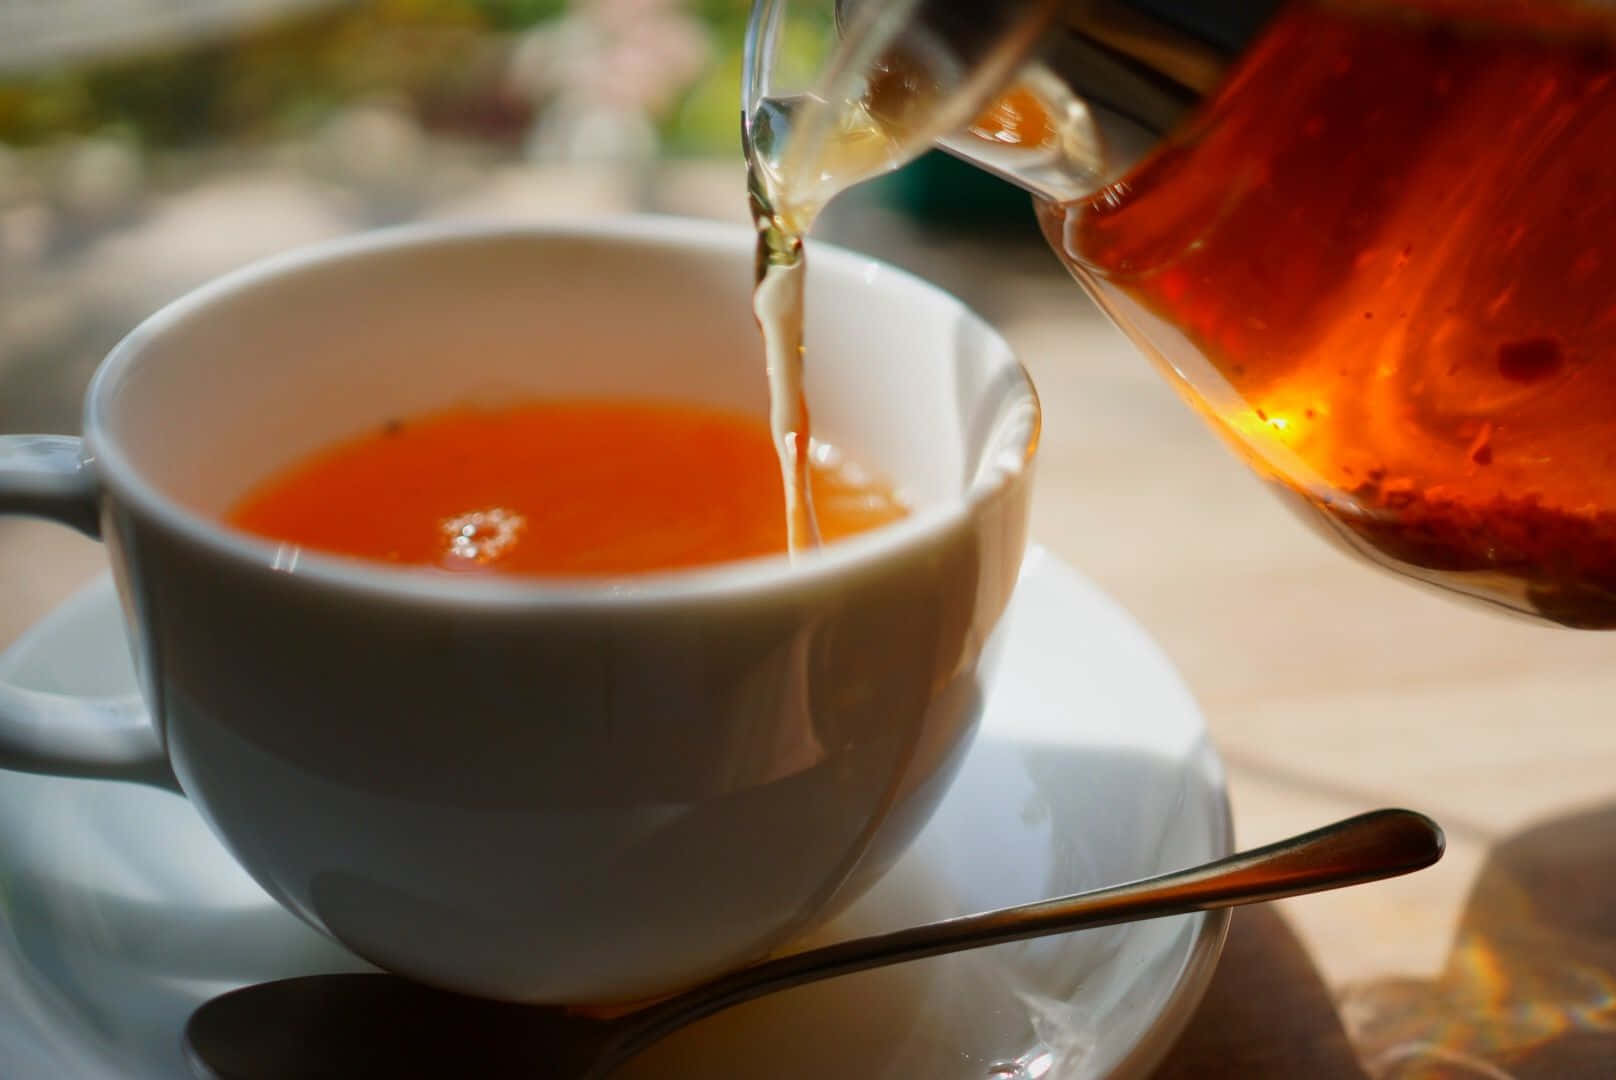 A Cup Of Tea Is Being Poured Into A Cup